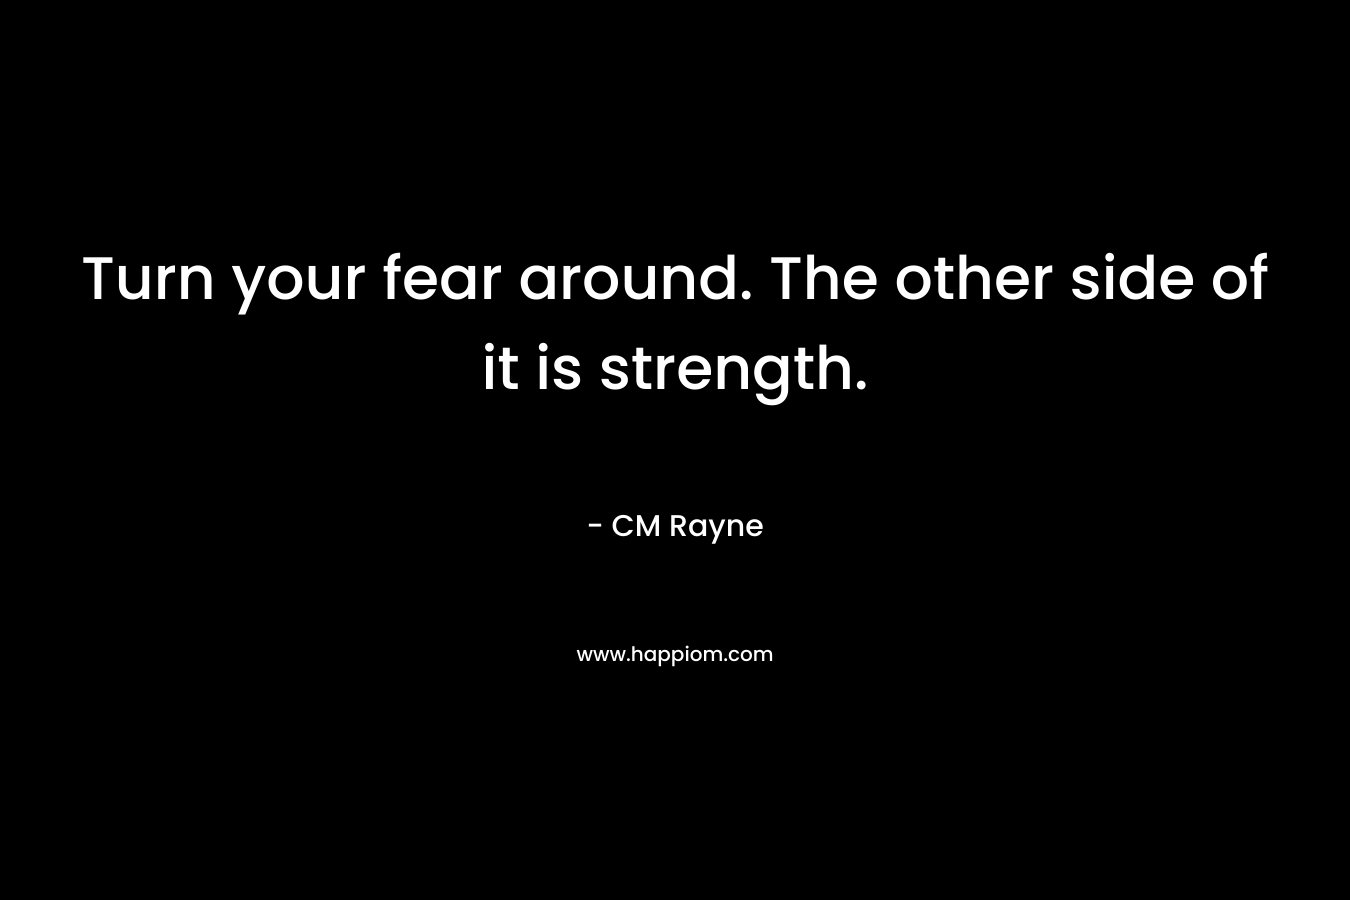 Turn your fear around. The other side of it is strength.